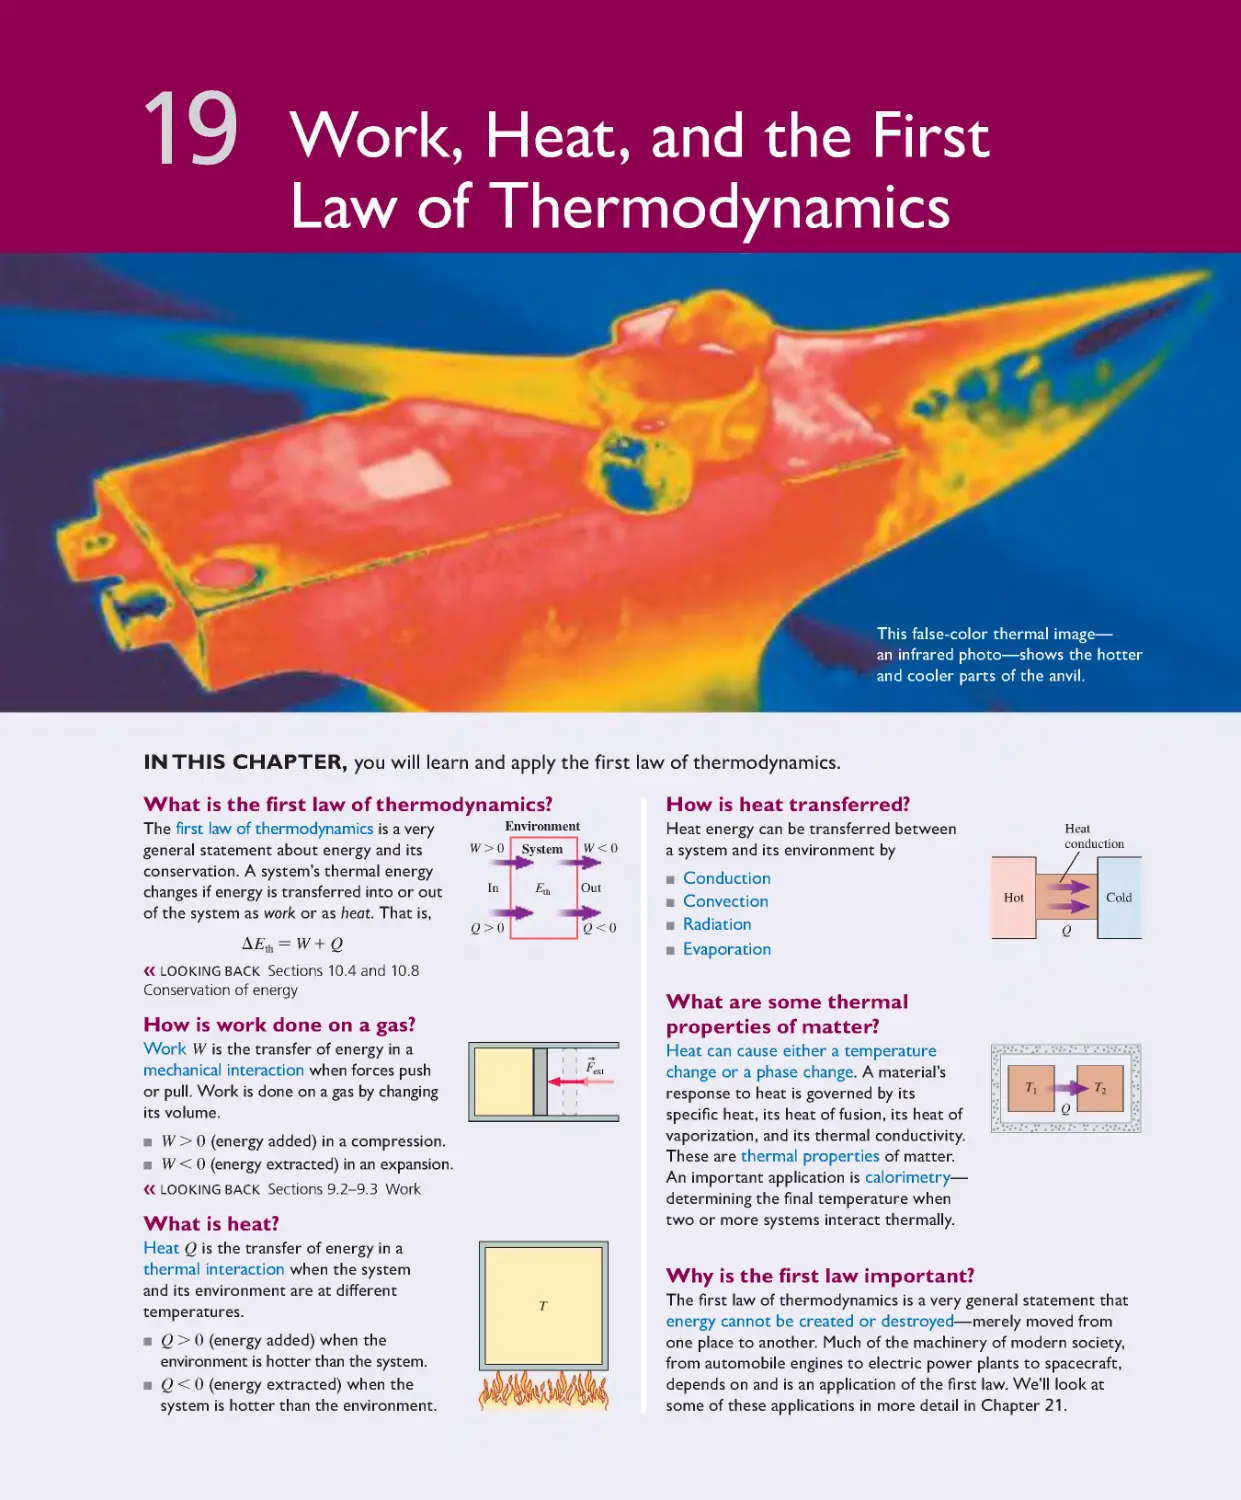 Chapter 19: Work, Heat, and the First Law of Thermodynamics